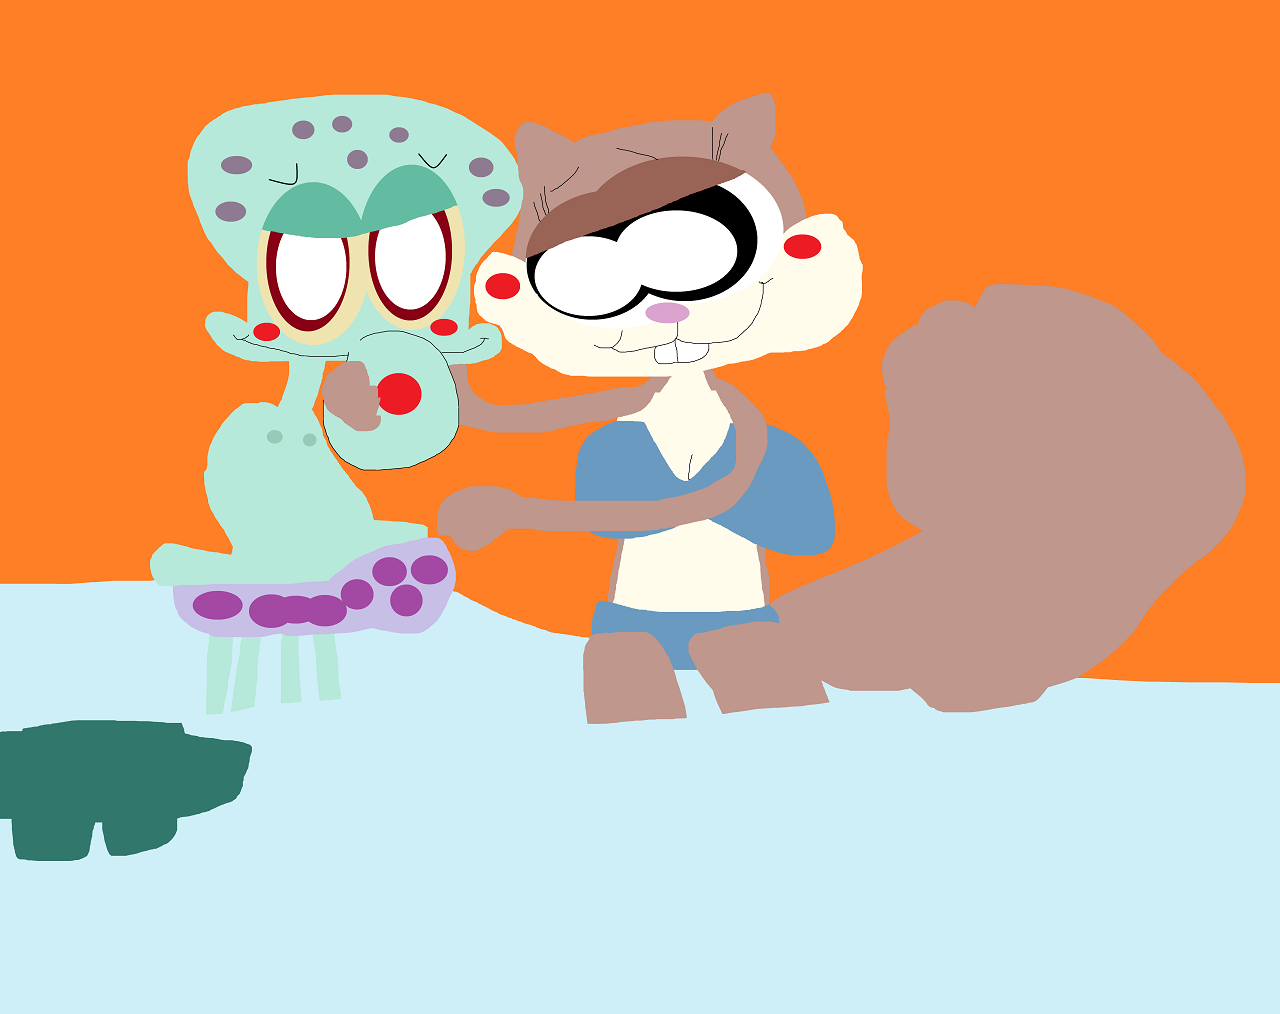 Accidental Skinny Dipping Squidward With Sandy by Falconlobo